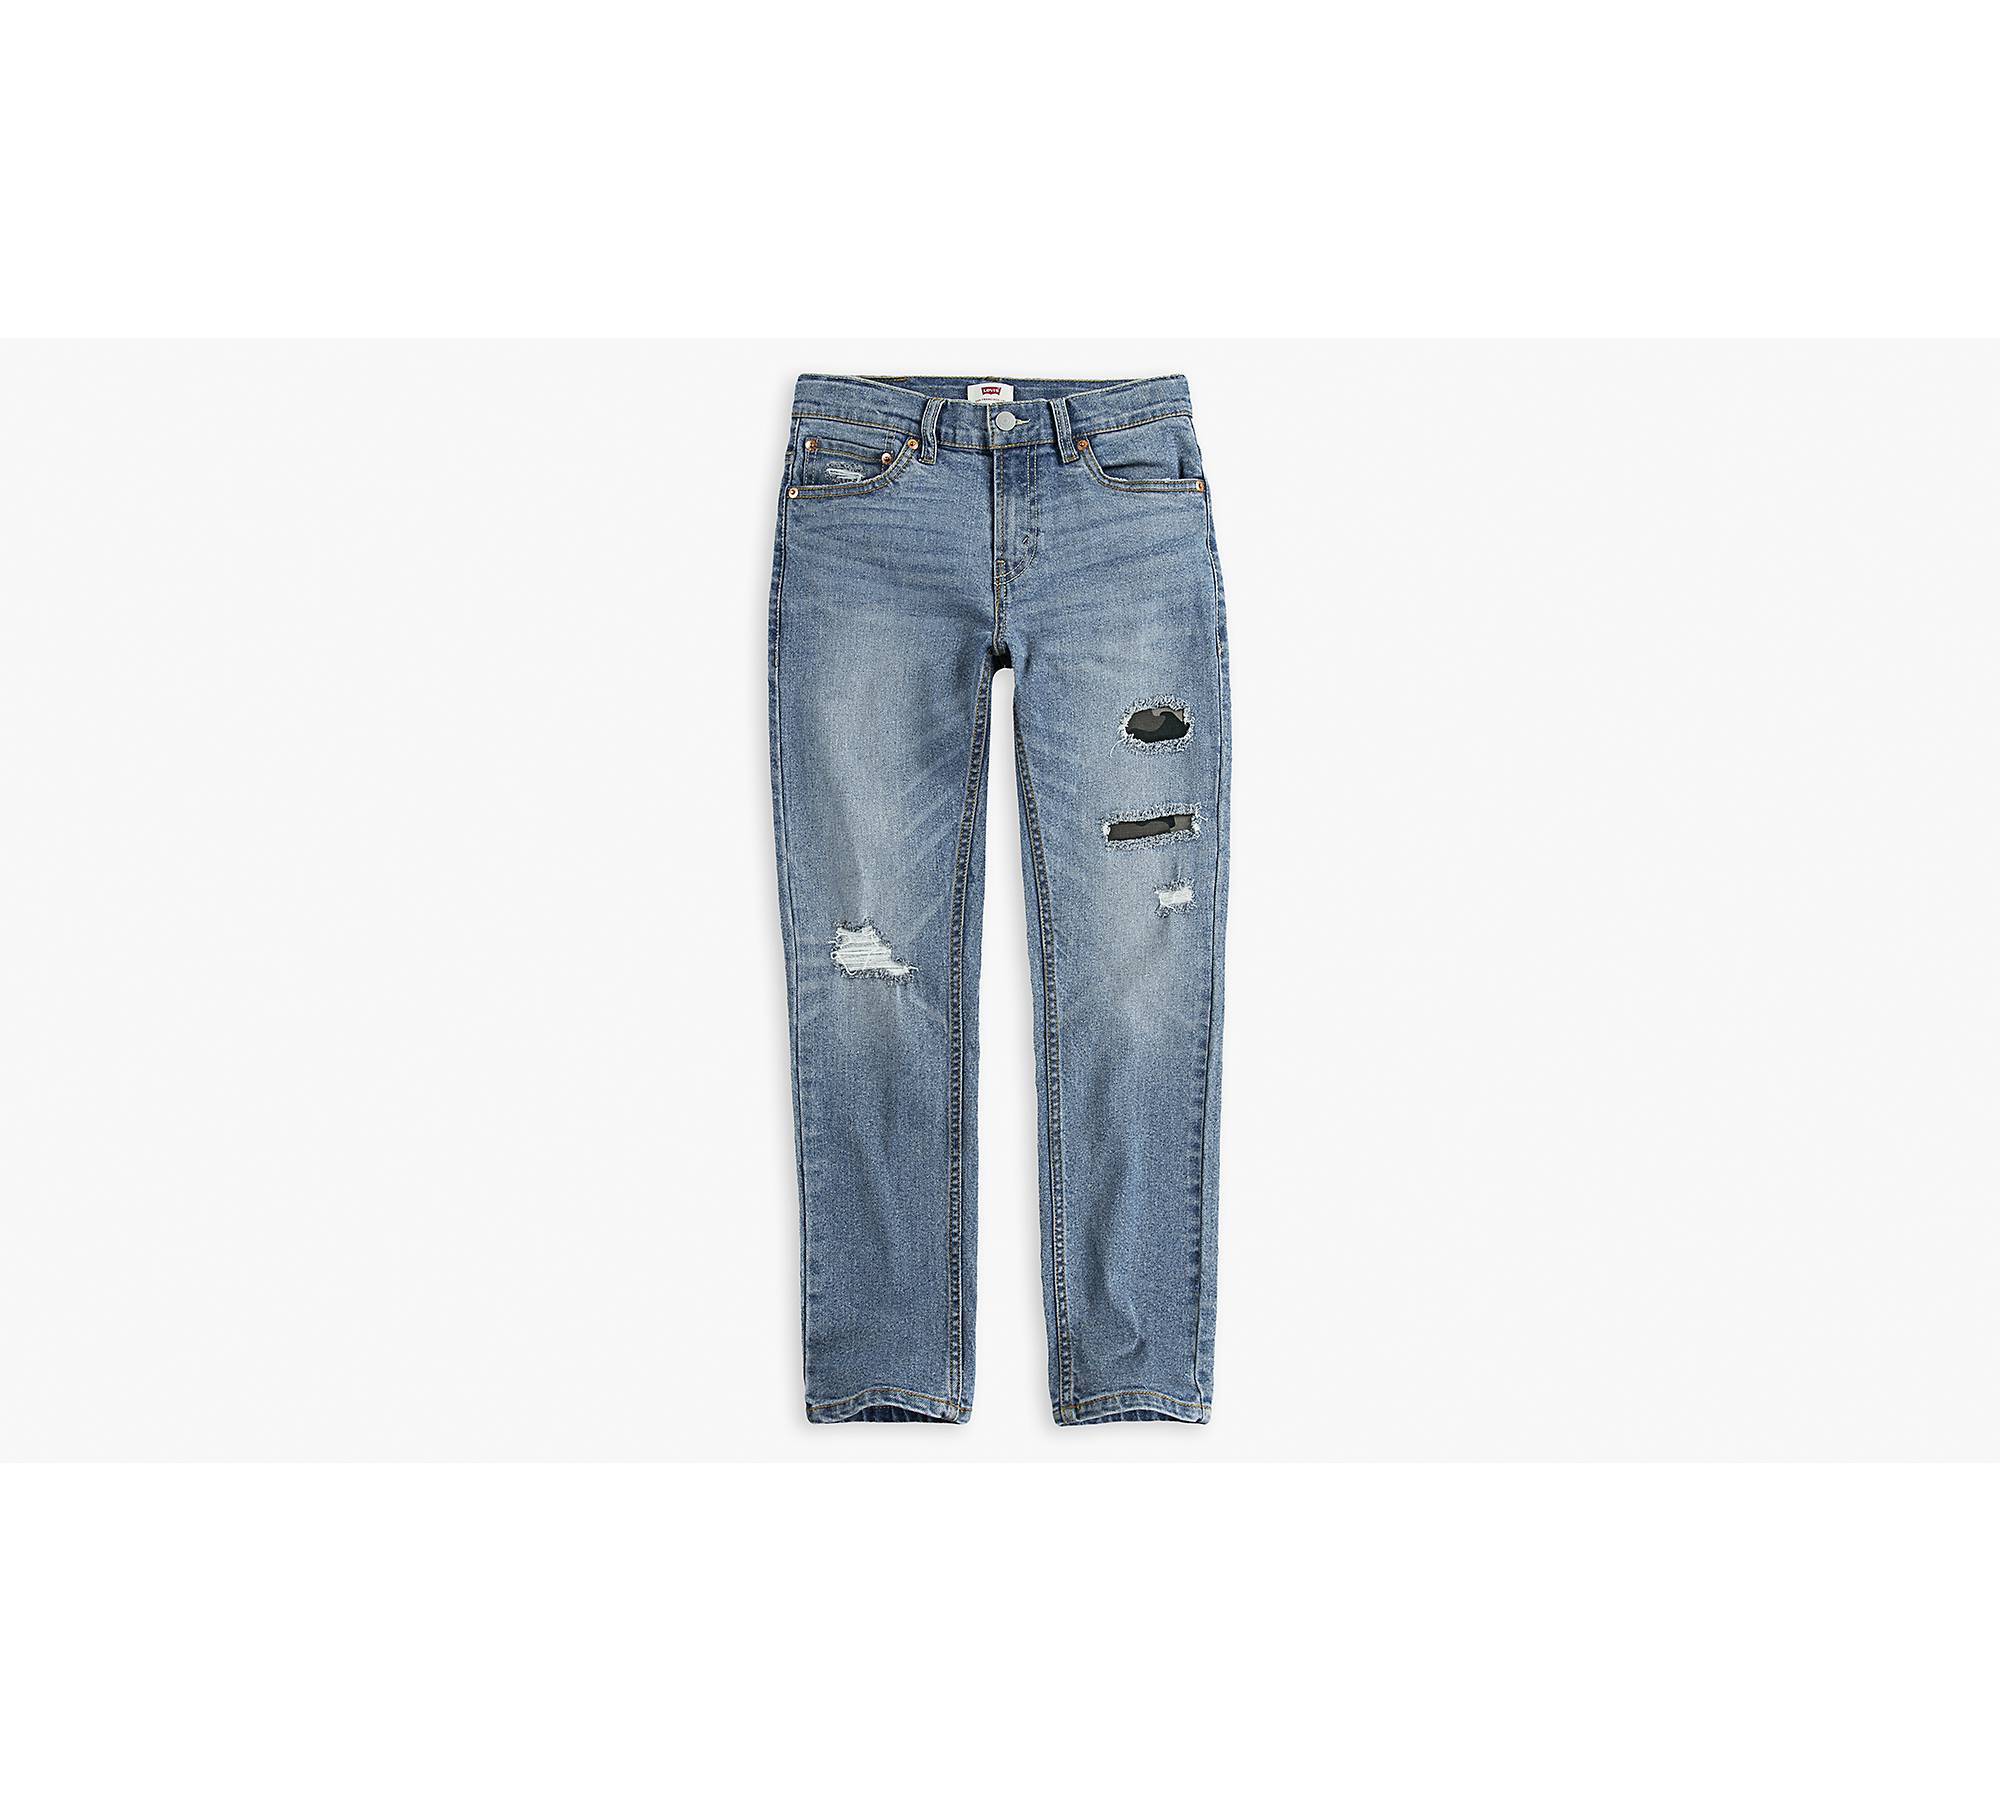 Ripped straight leg denim jeans blue - BOYS 2-10 YEARS Bottoms & Jeans